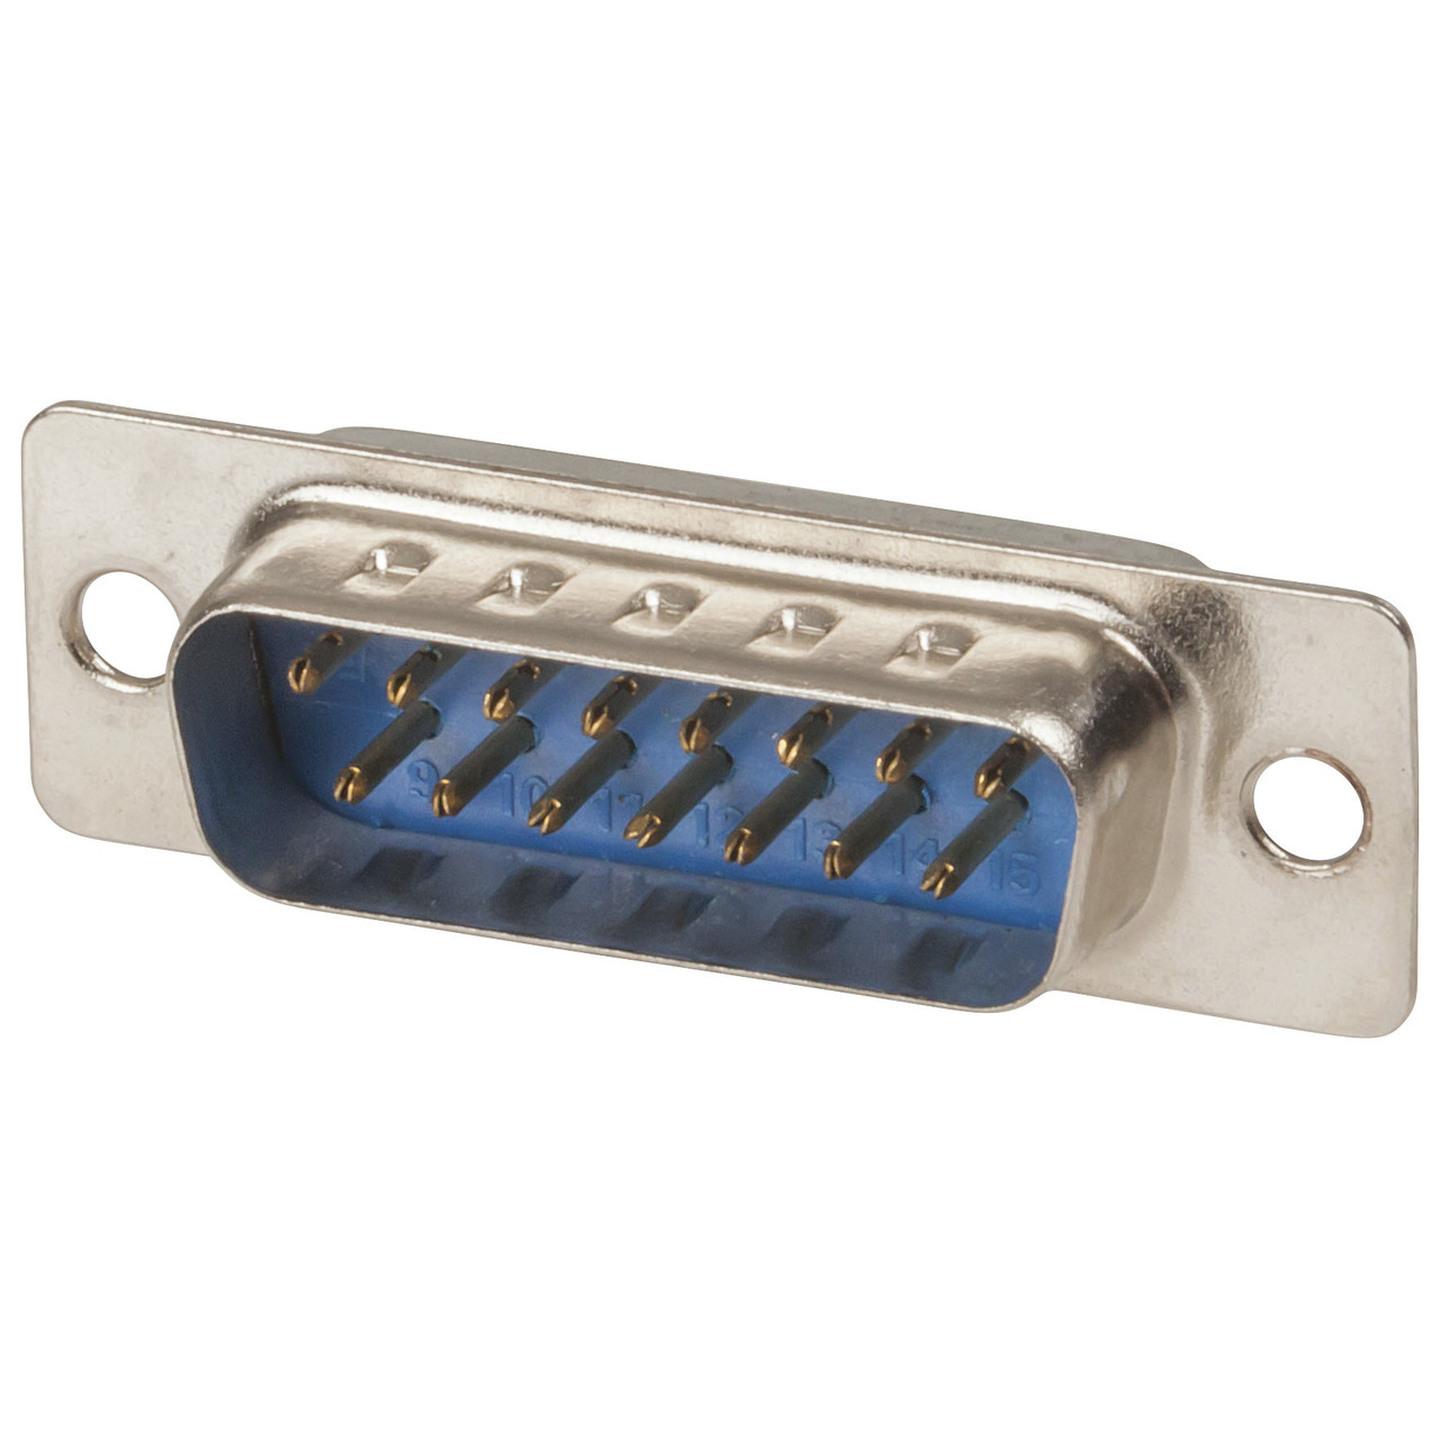 DB15 Male Connector - Solder